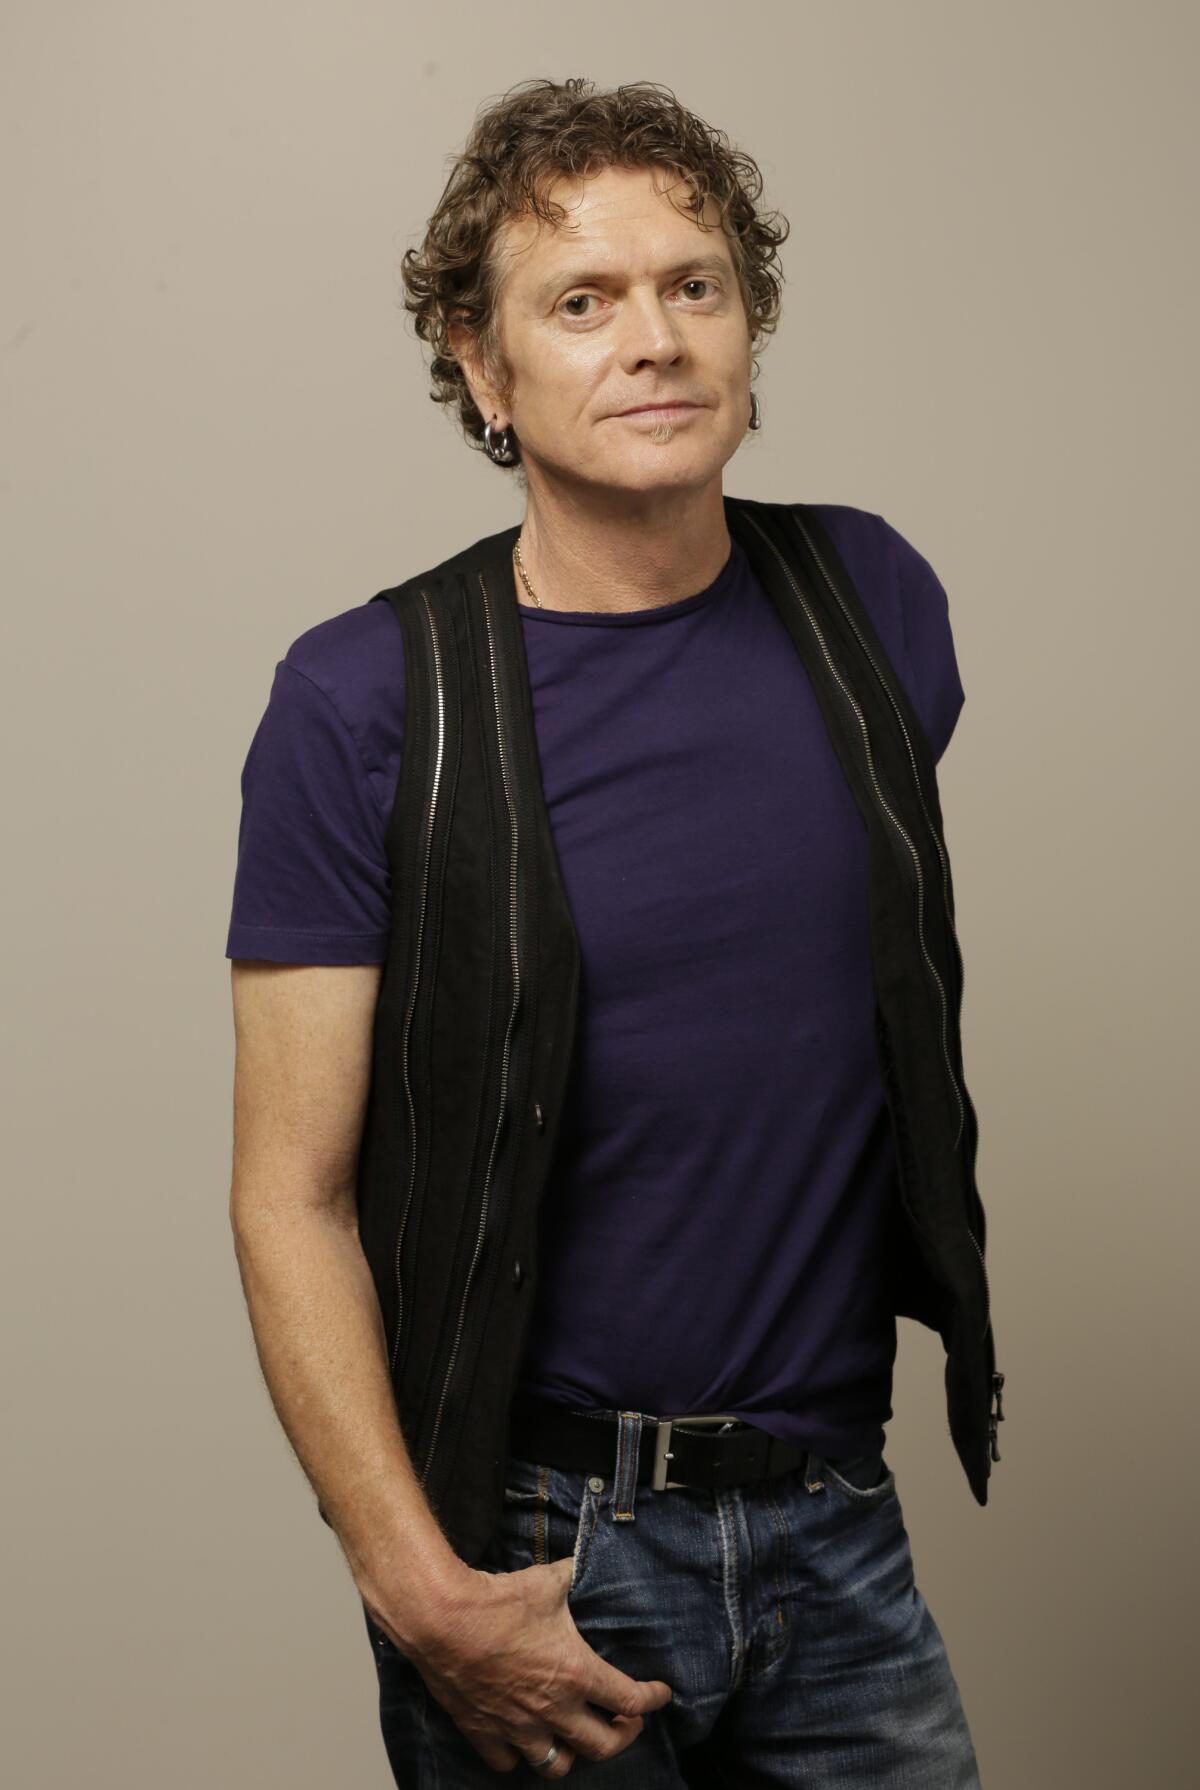 Def Leppard drummer Rick Allen  wearing a vest over a T-shirt and jeans, poses for a portrait